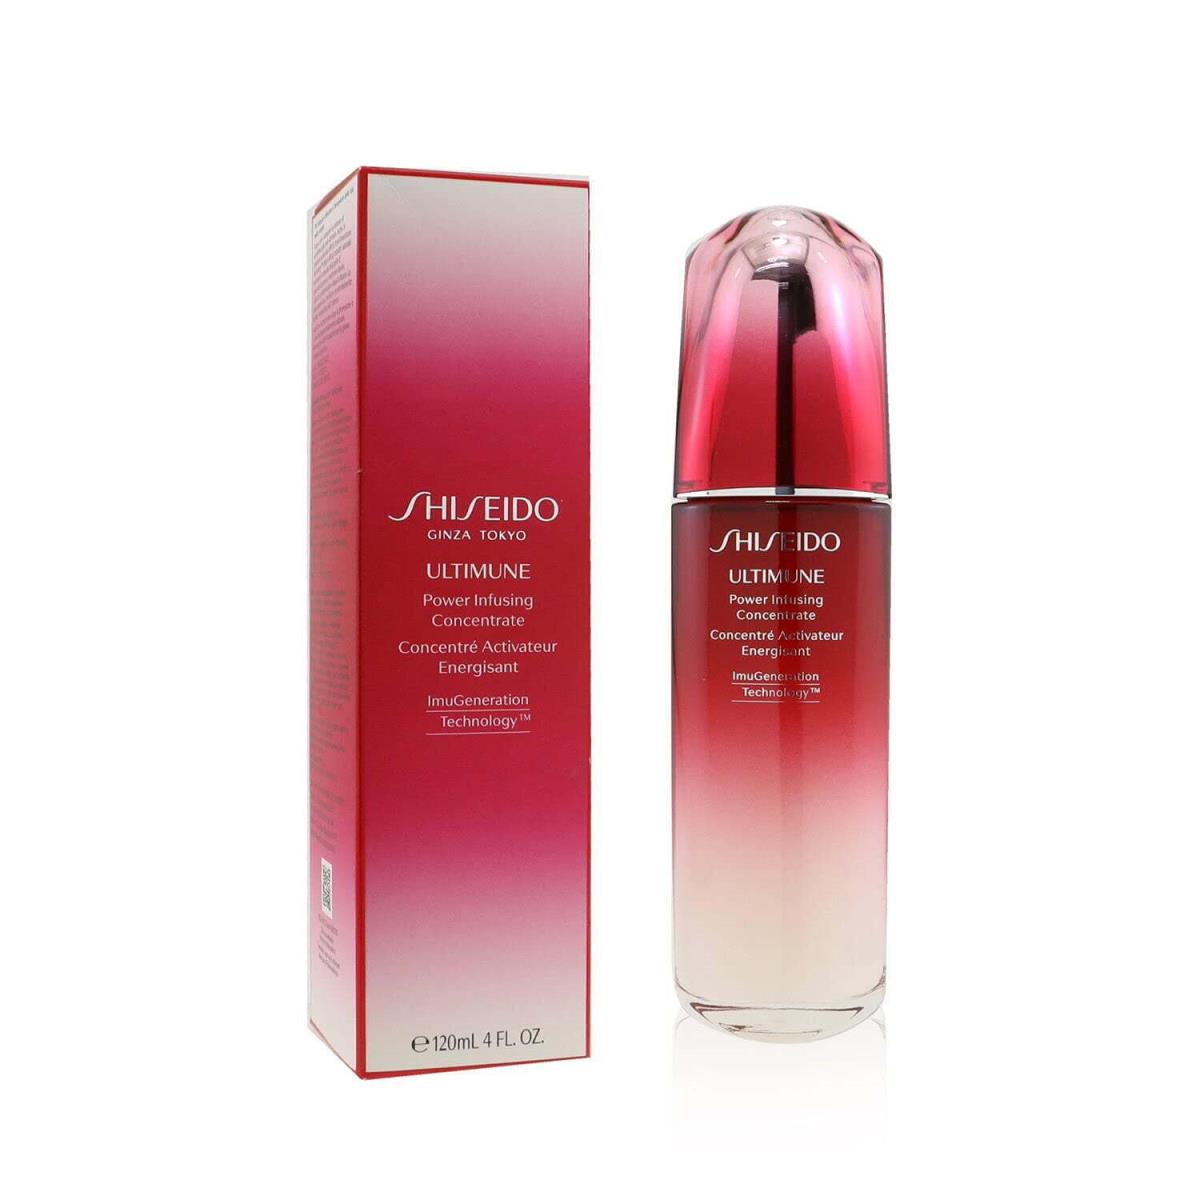 Shiseido Ultimune Power Infusing Concentrate 4oz/120ml